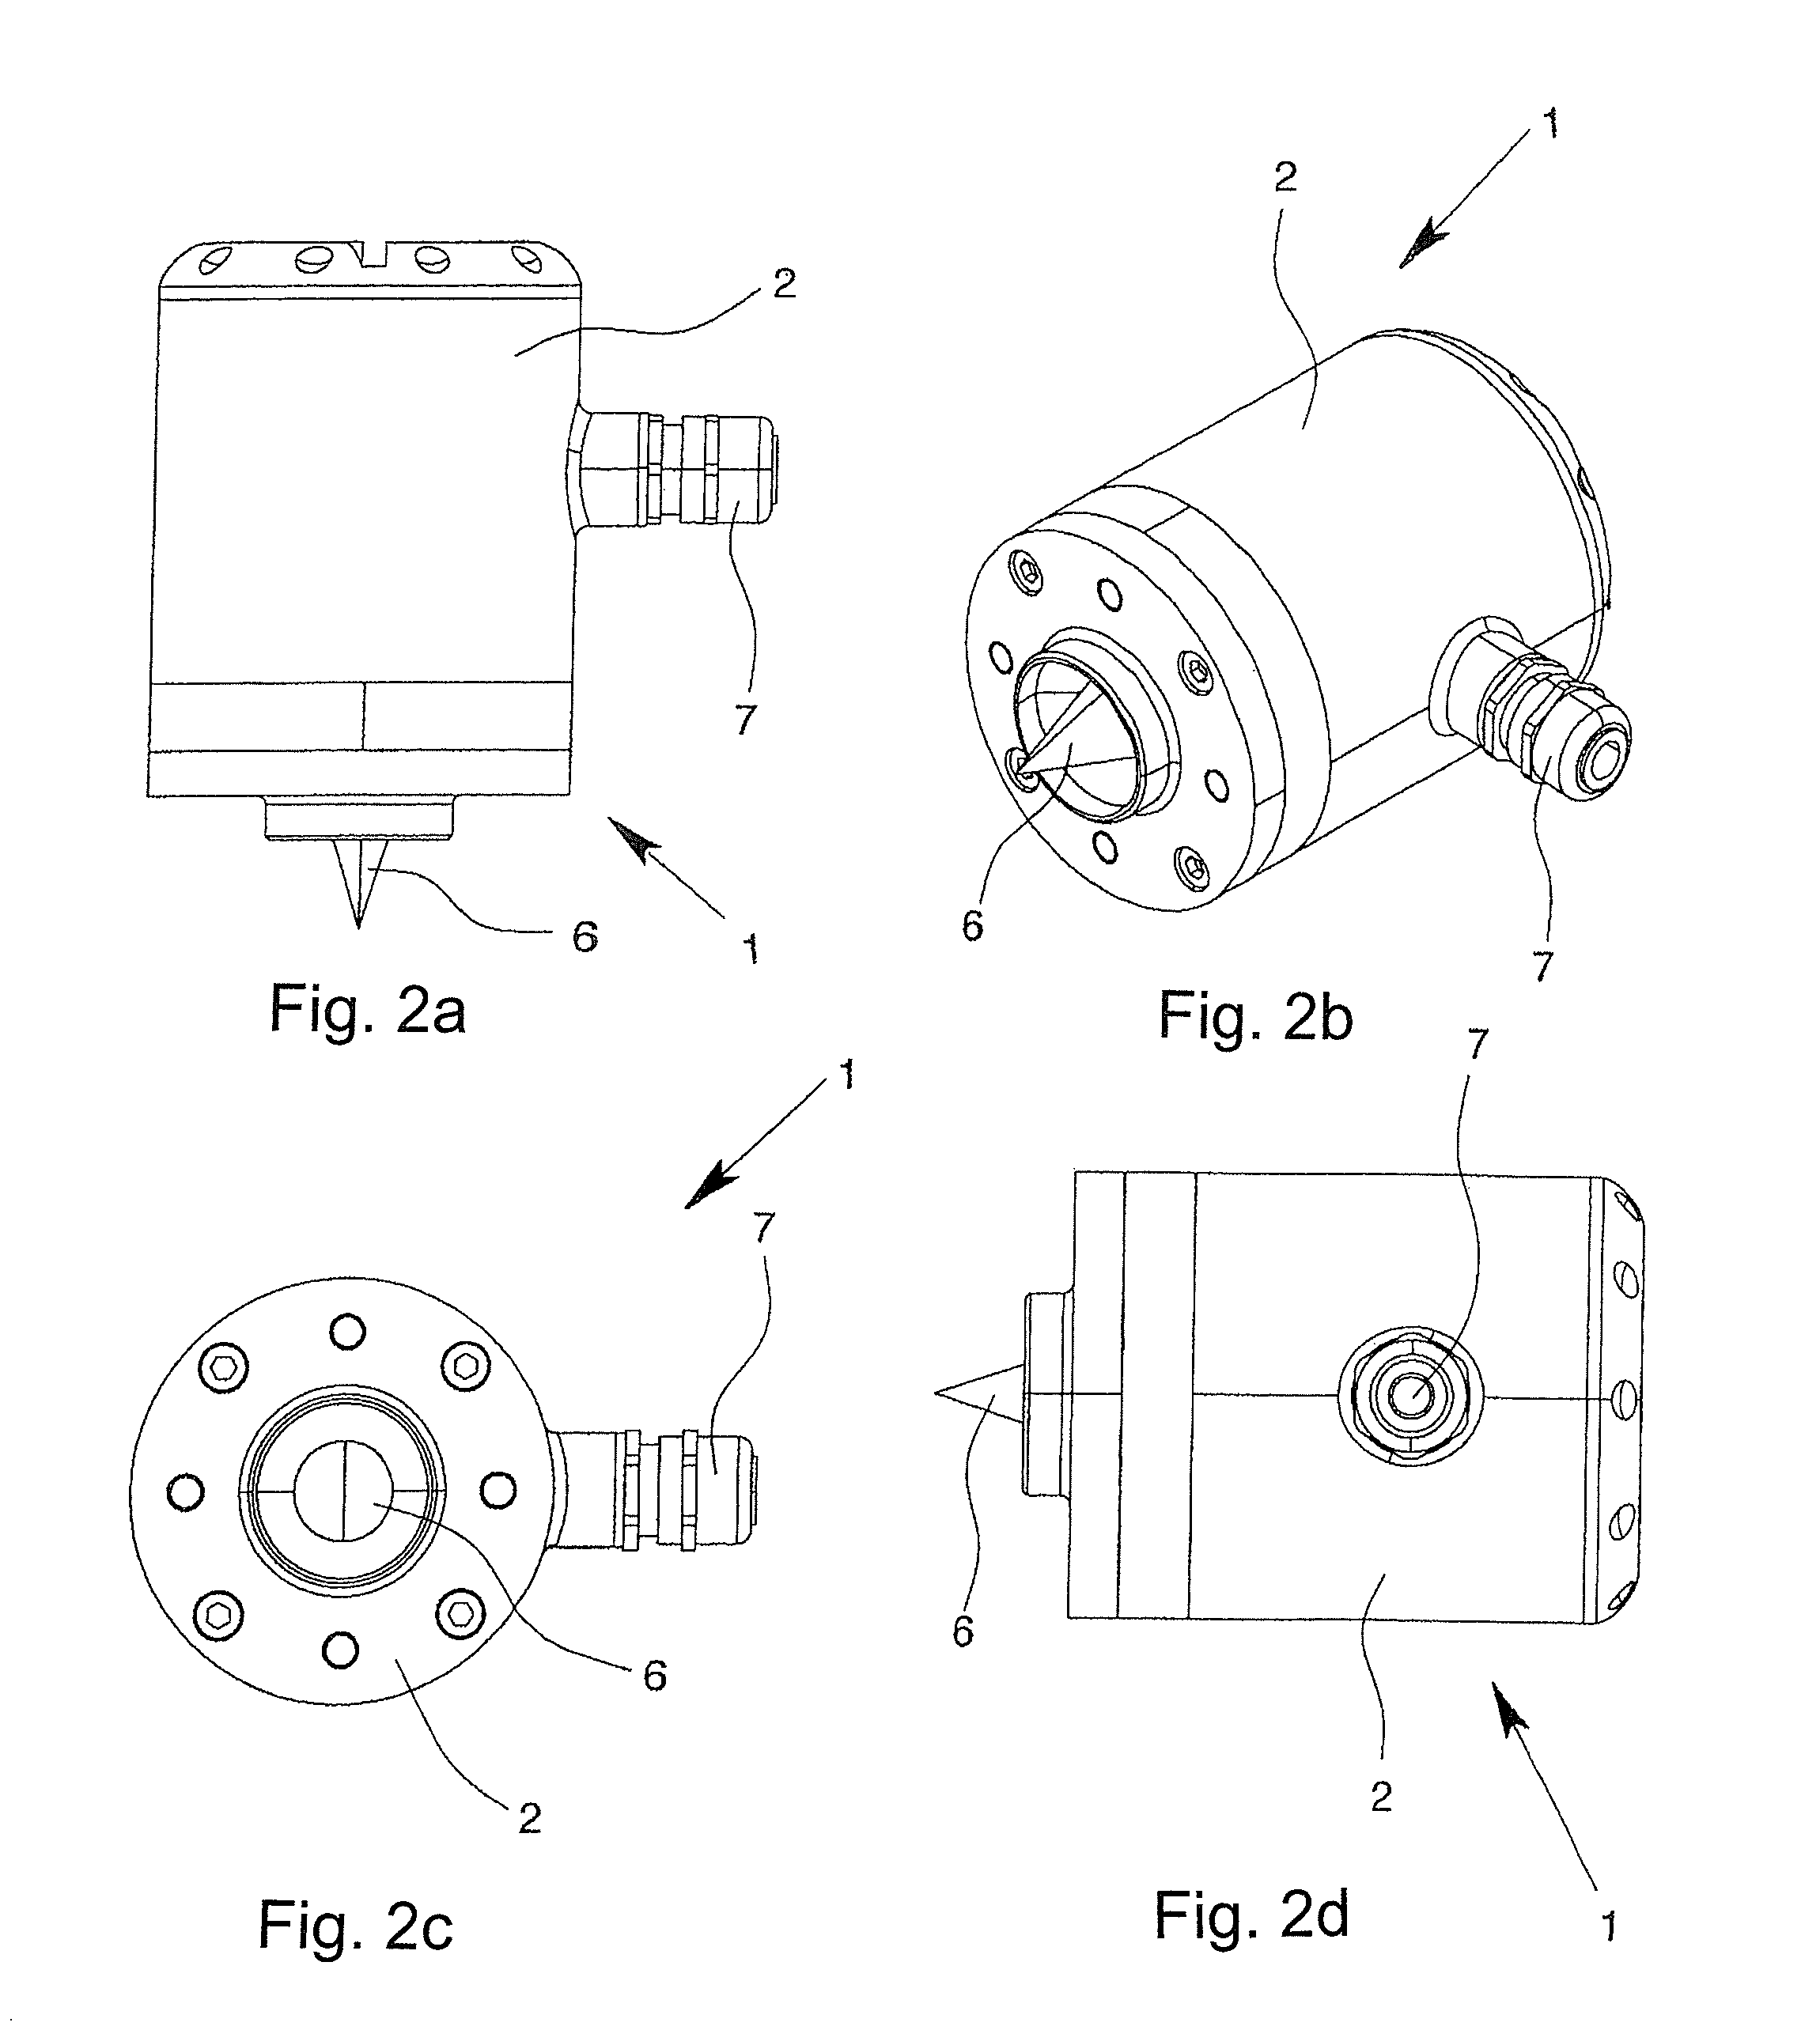 Microwave emitter and level measuring device